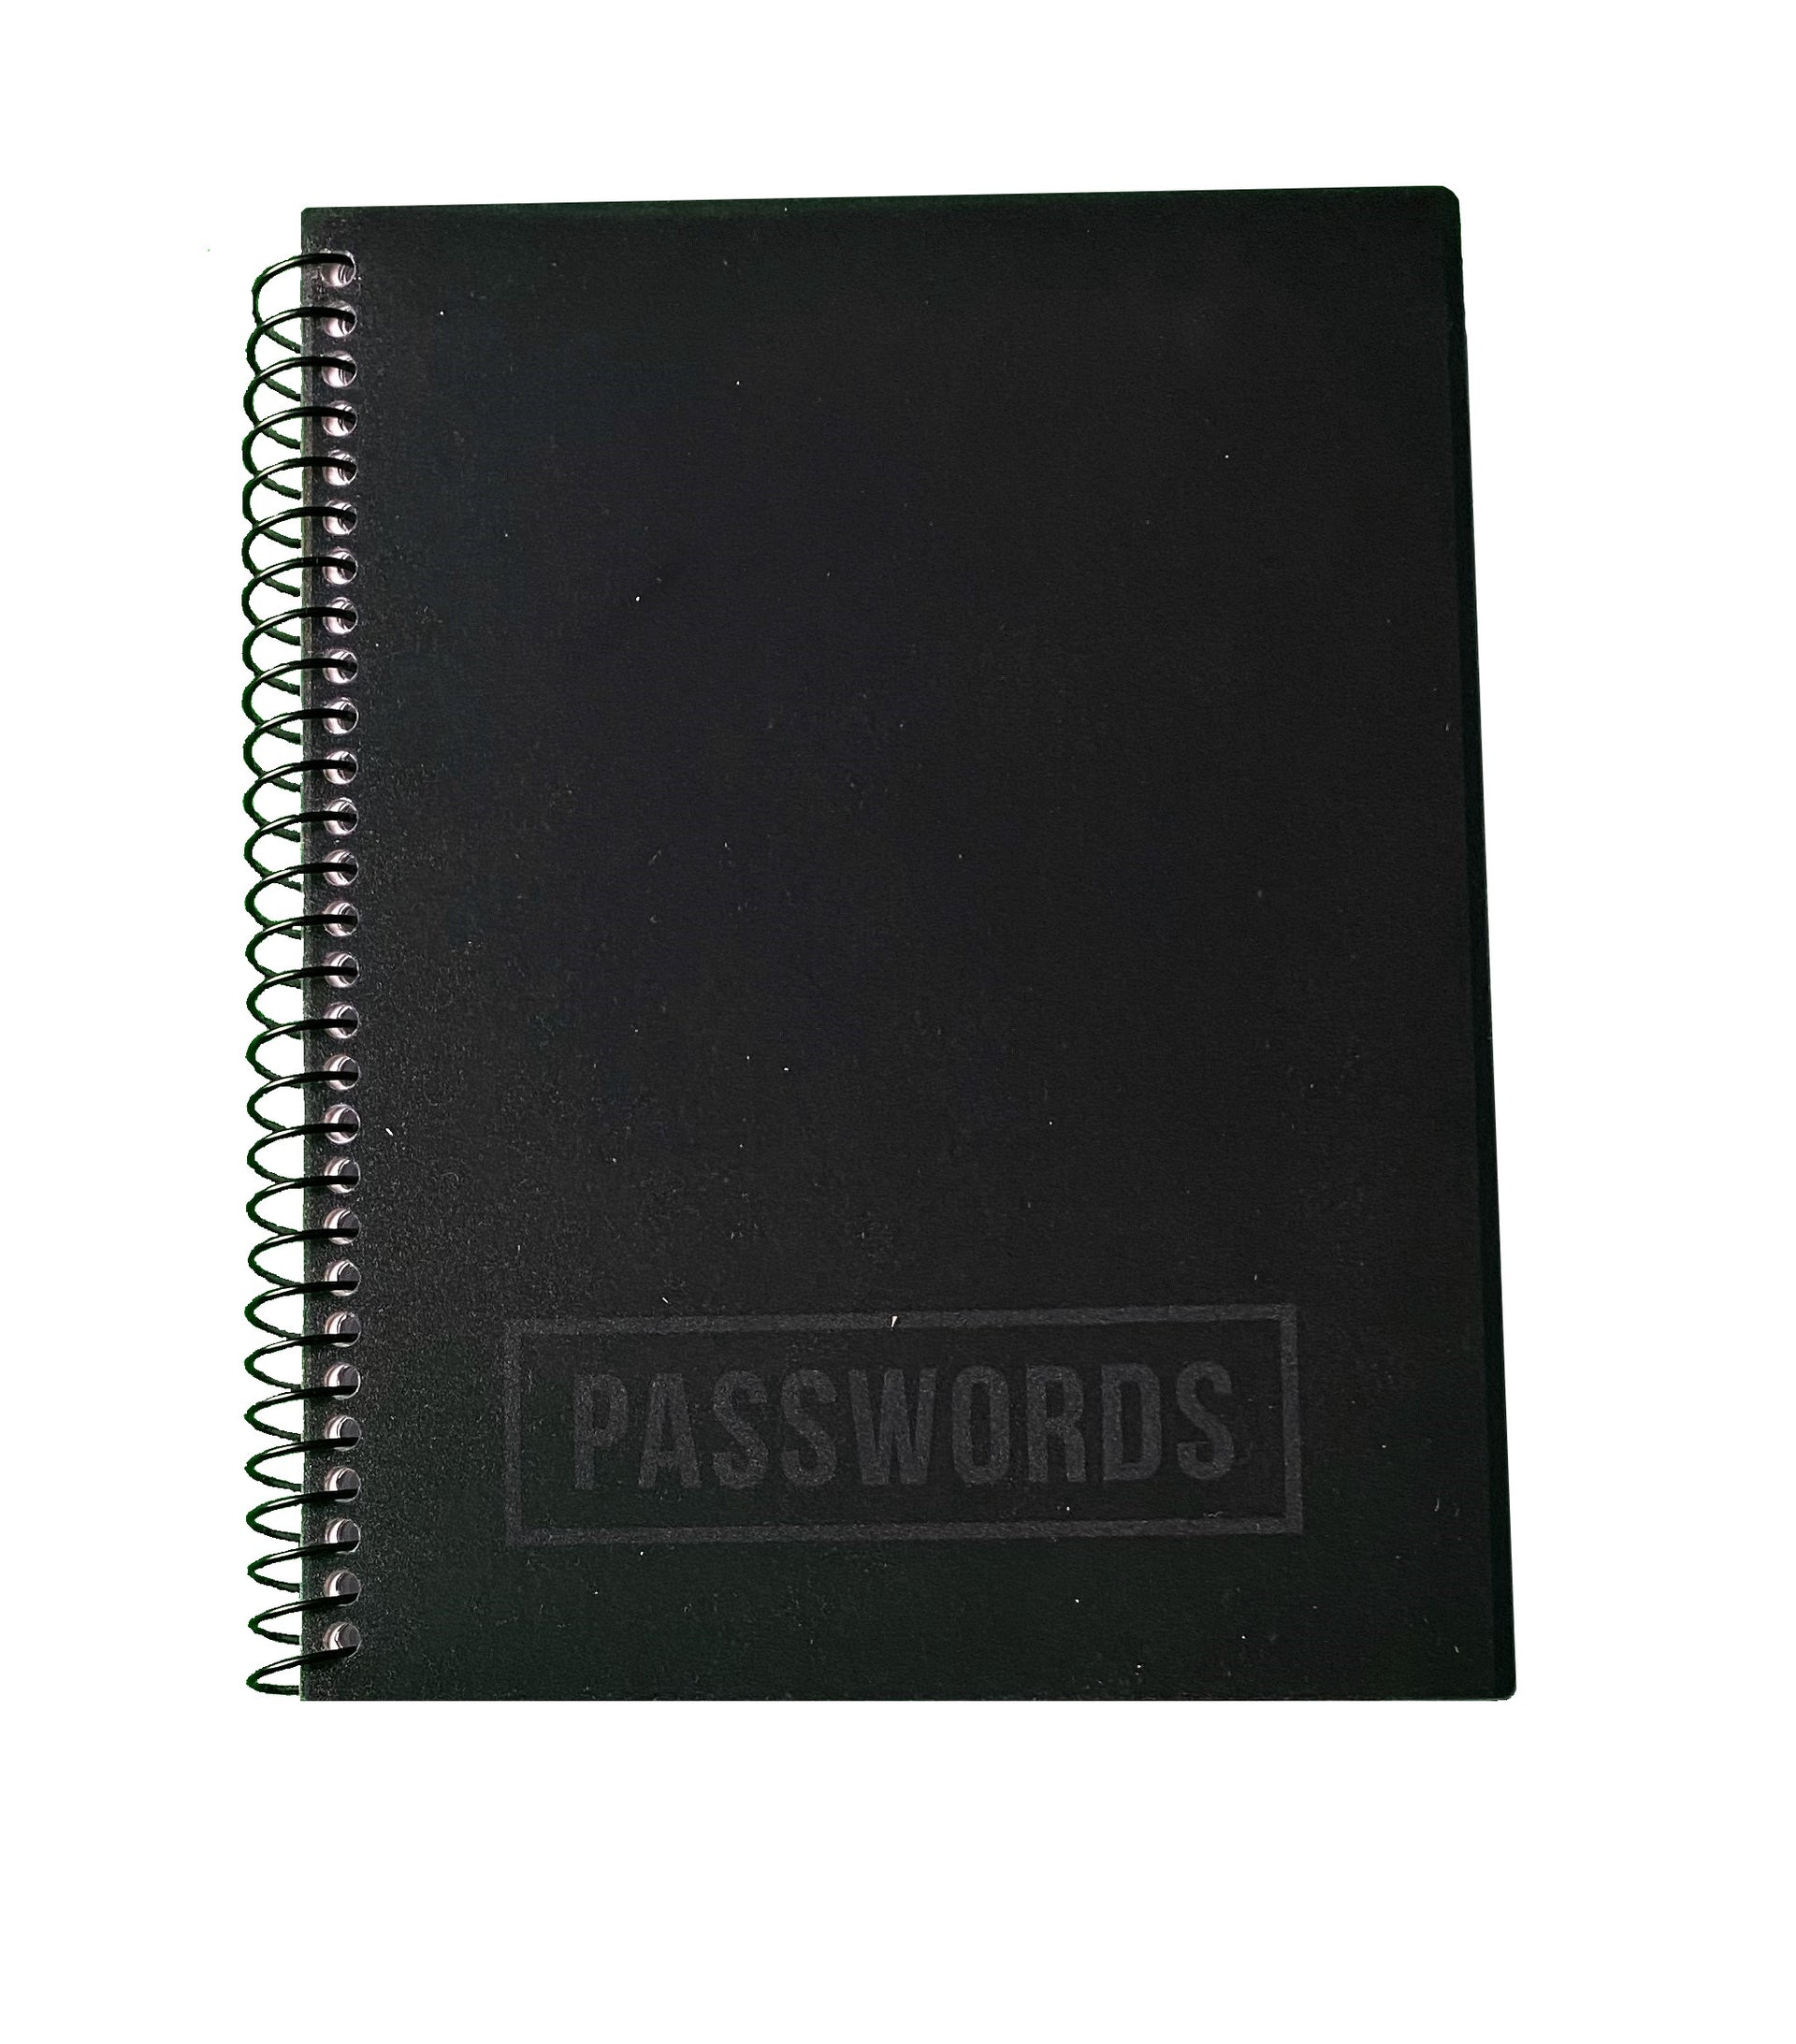 RE-FOCUS THE CREATIVE OFFICE, Small/Mini Password Book, Alphabetical Tabs, Spiral Binding